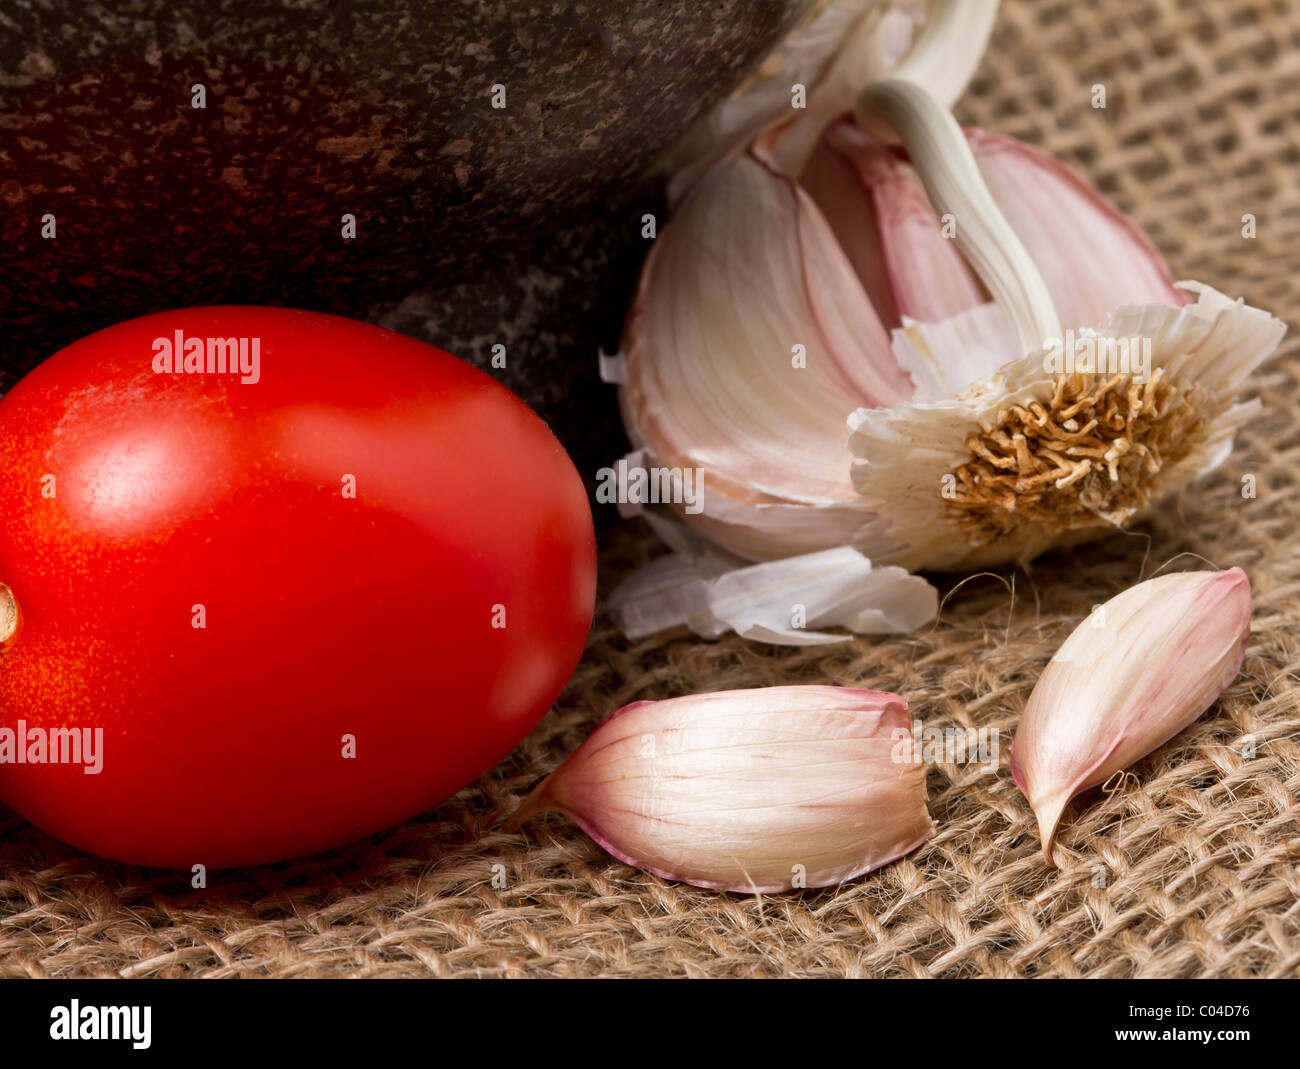 Simple vibrant basic ingredients of Italian cooking, Garlic and Tomato. Stock Photo